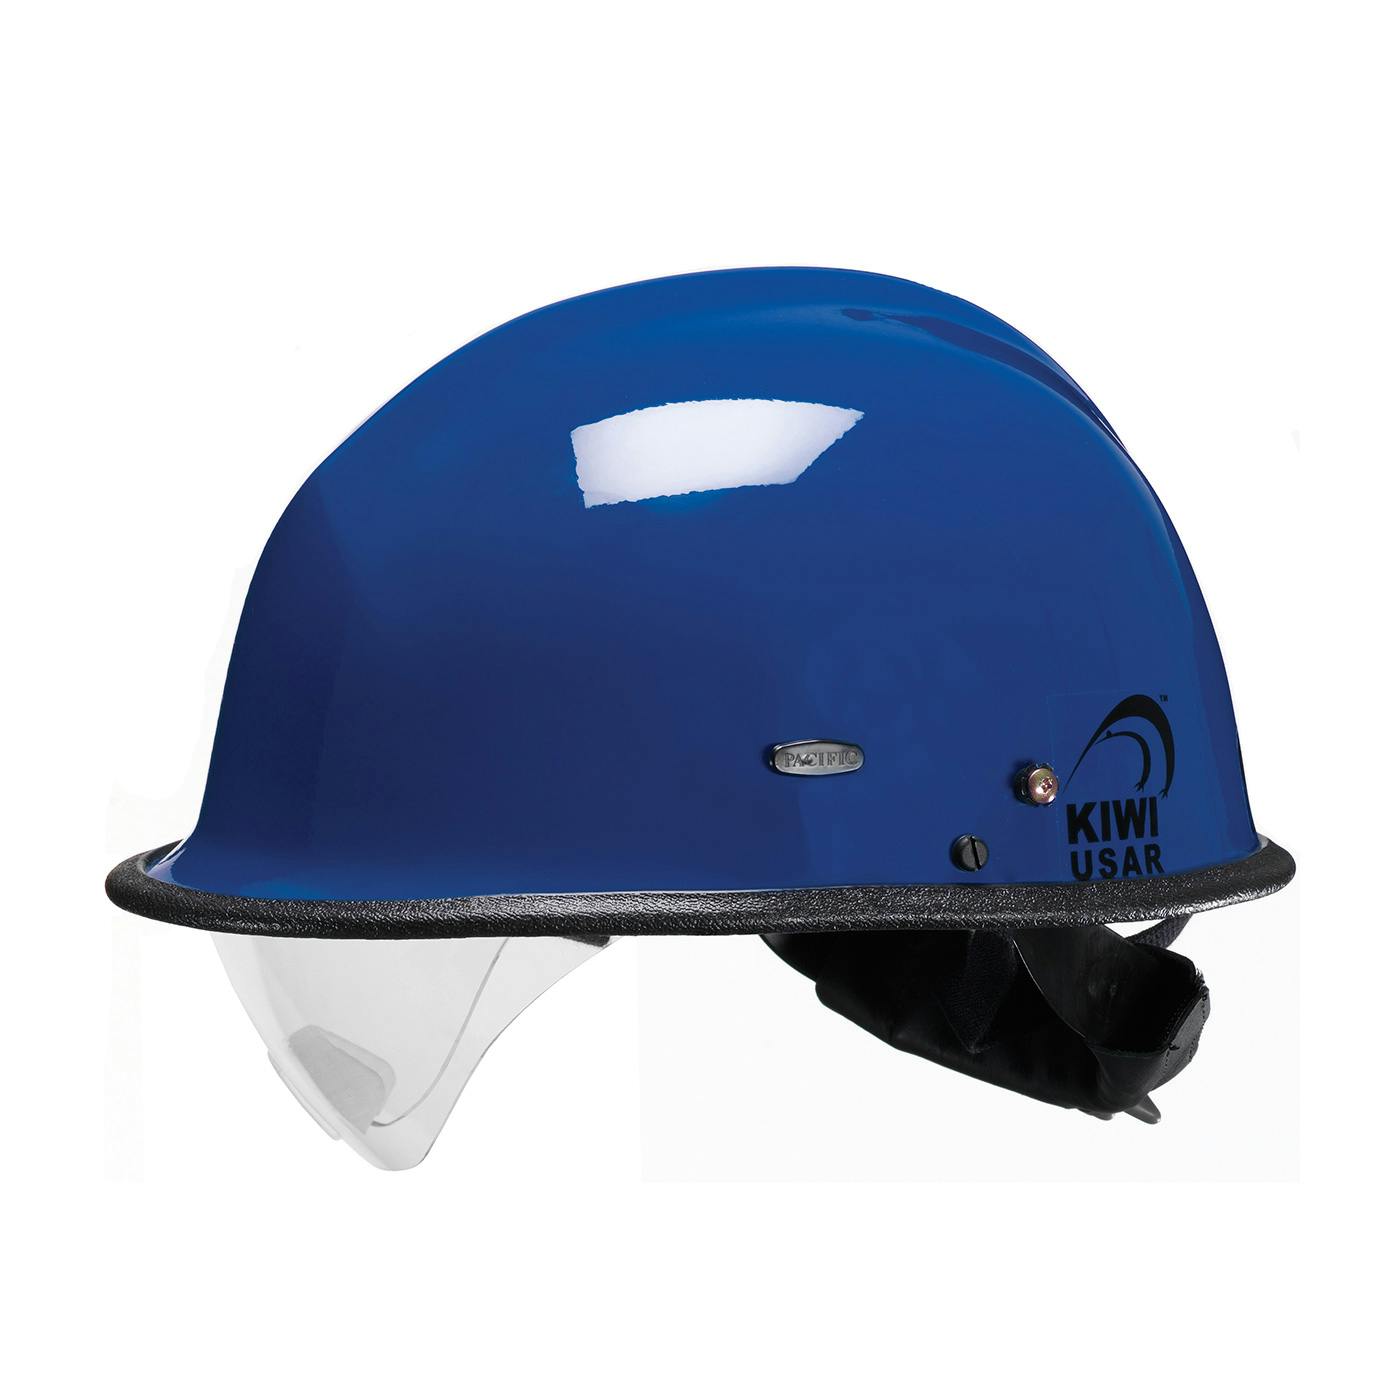 R3V4 KIWI USAR™ Rescue Helmet with ESS Goggle Mounts and Retractable Eye Protector (804-340X)_0